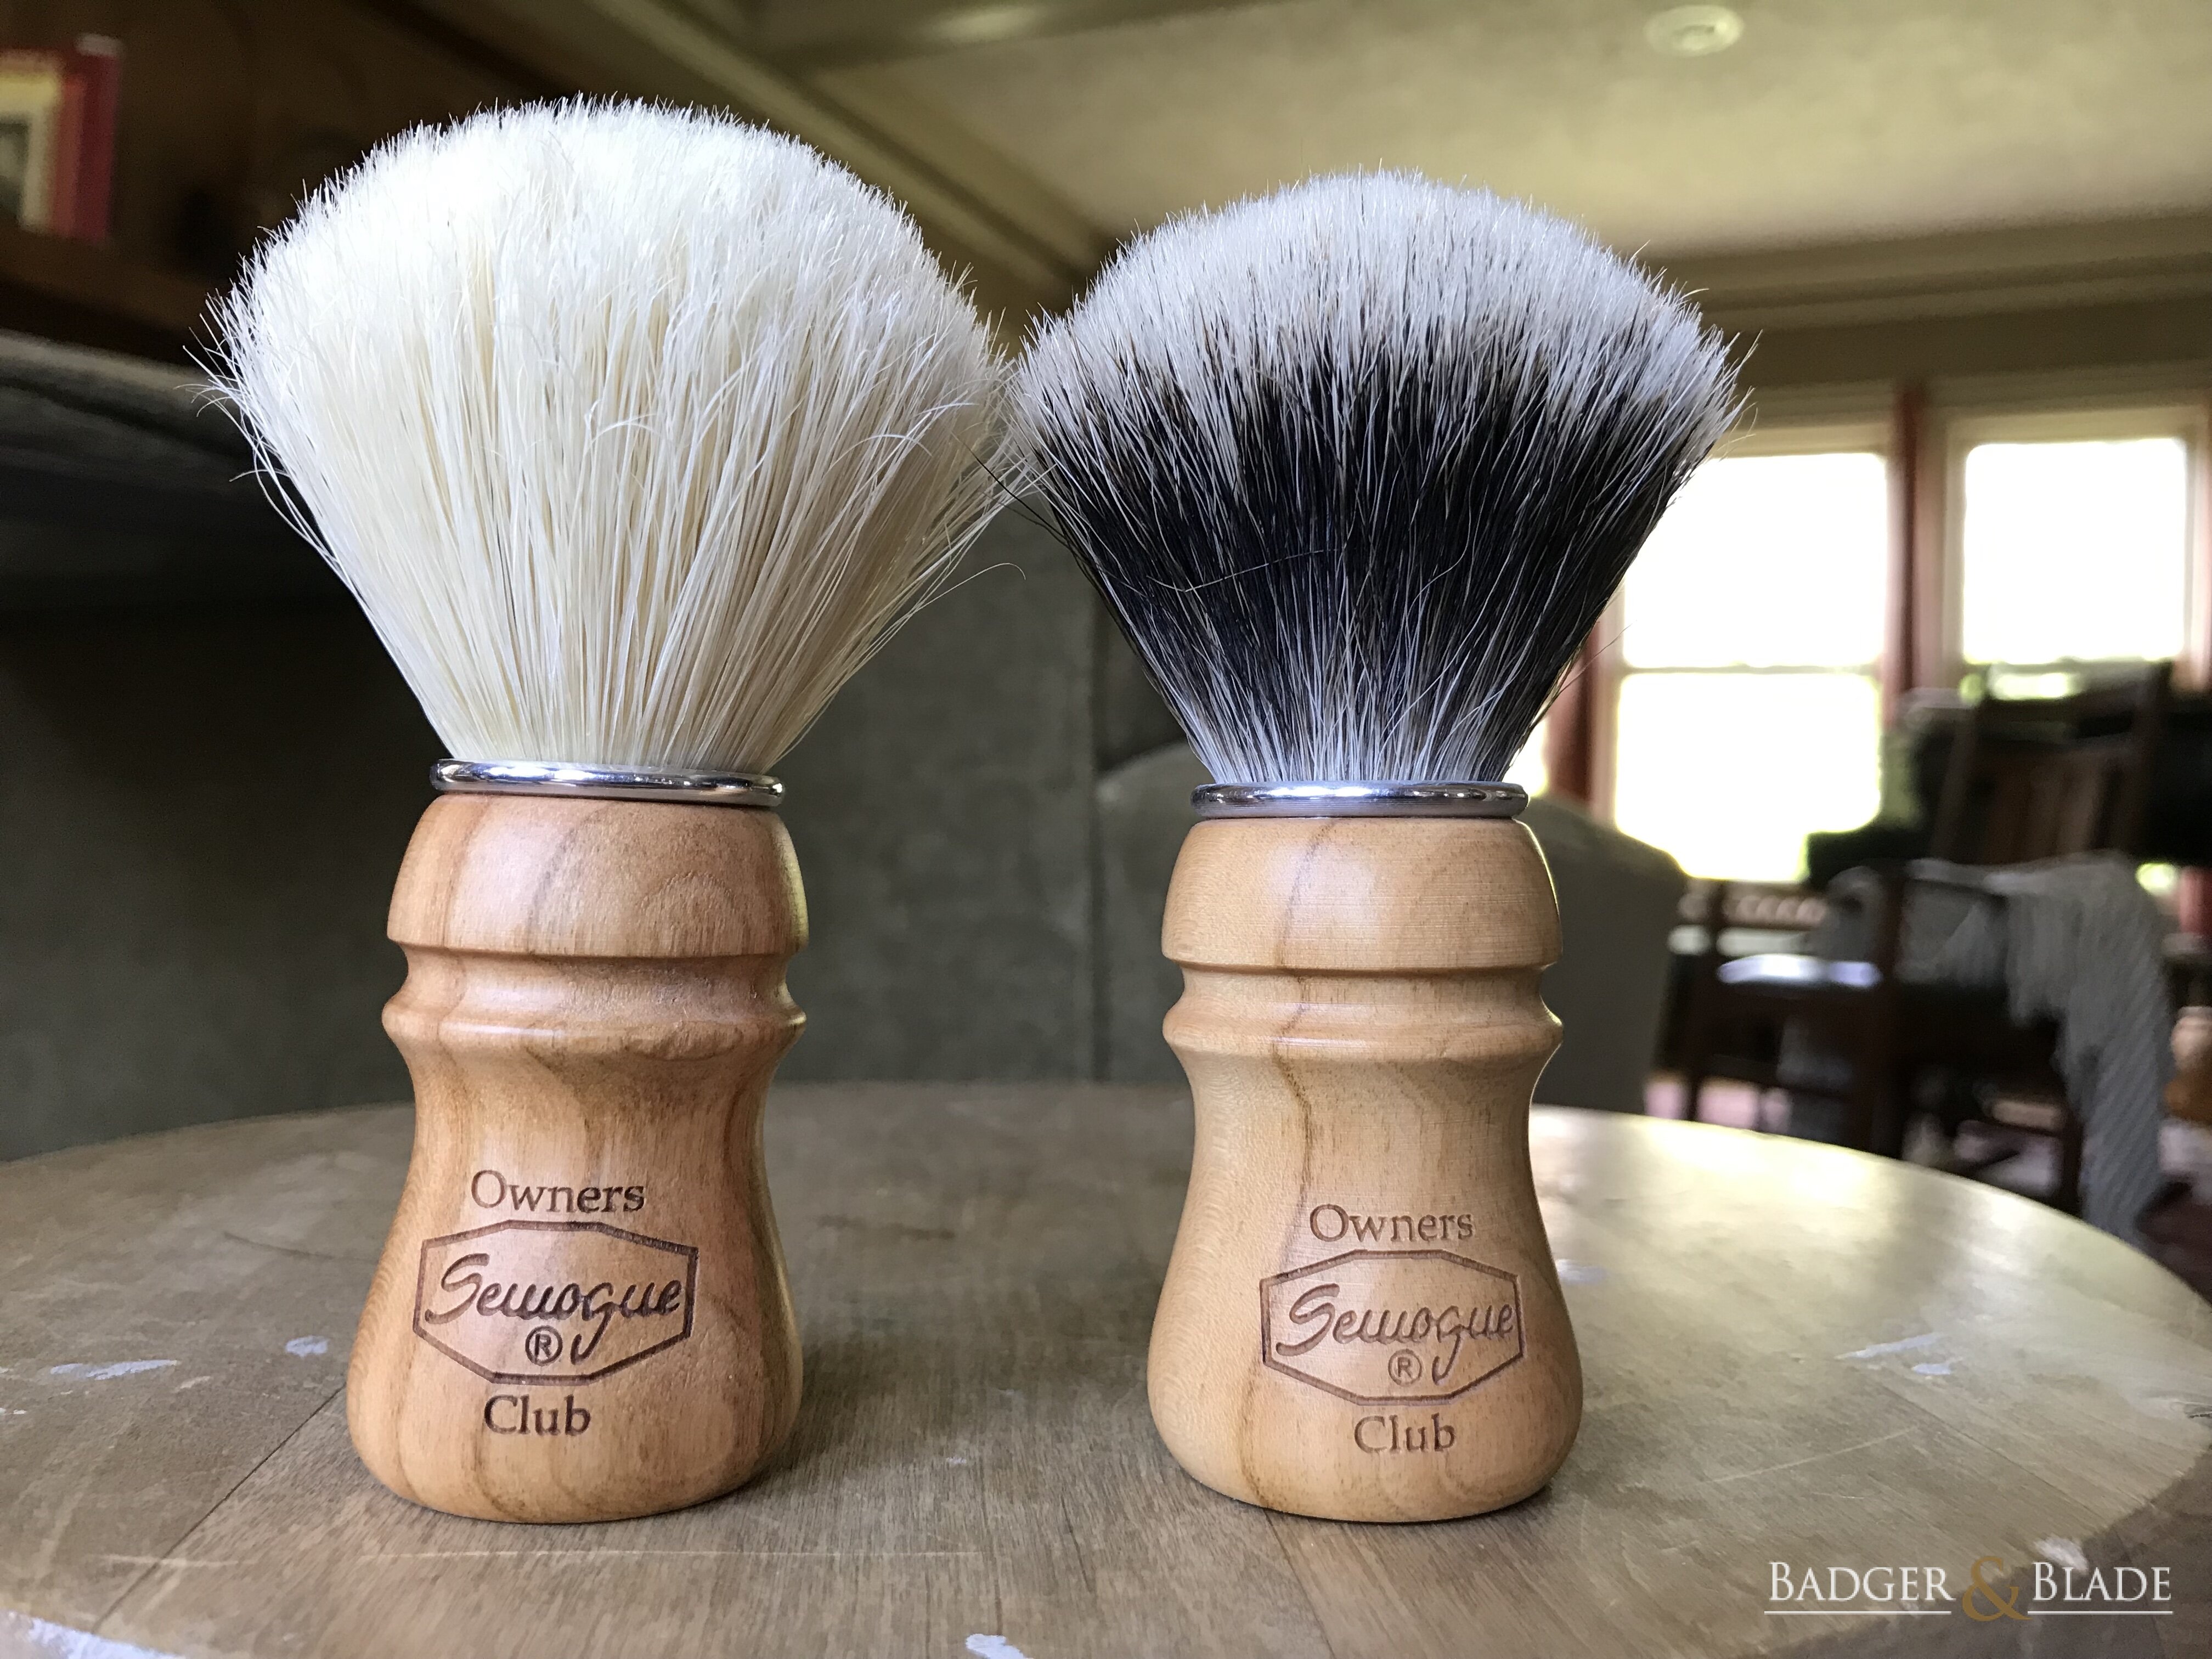 2019-04-13 - Semogue Owners Club Brushes